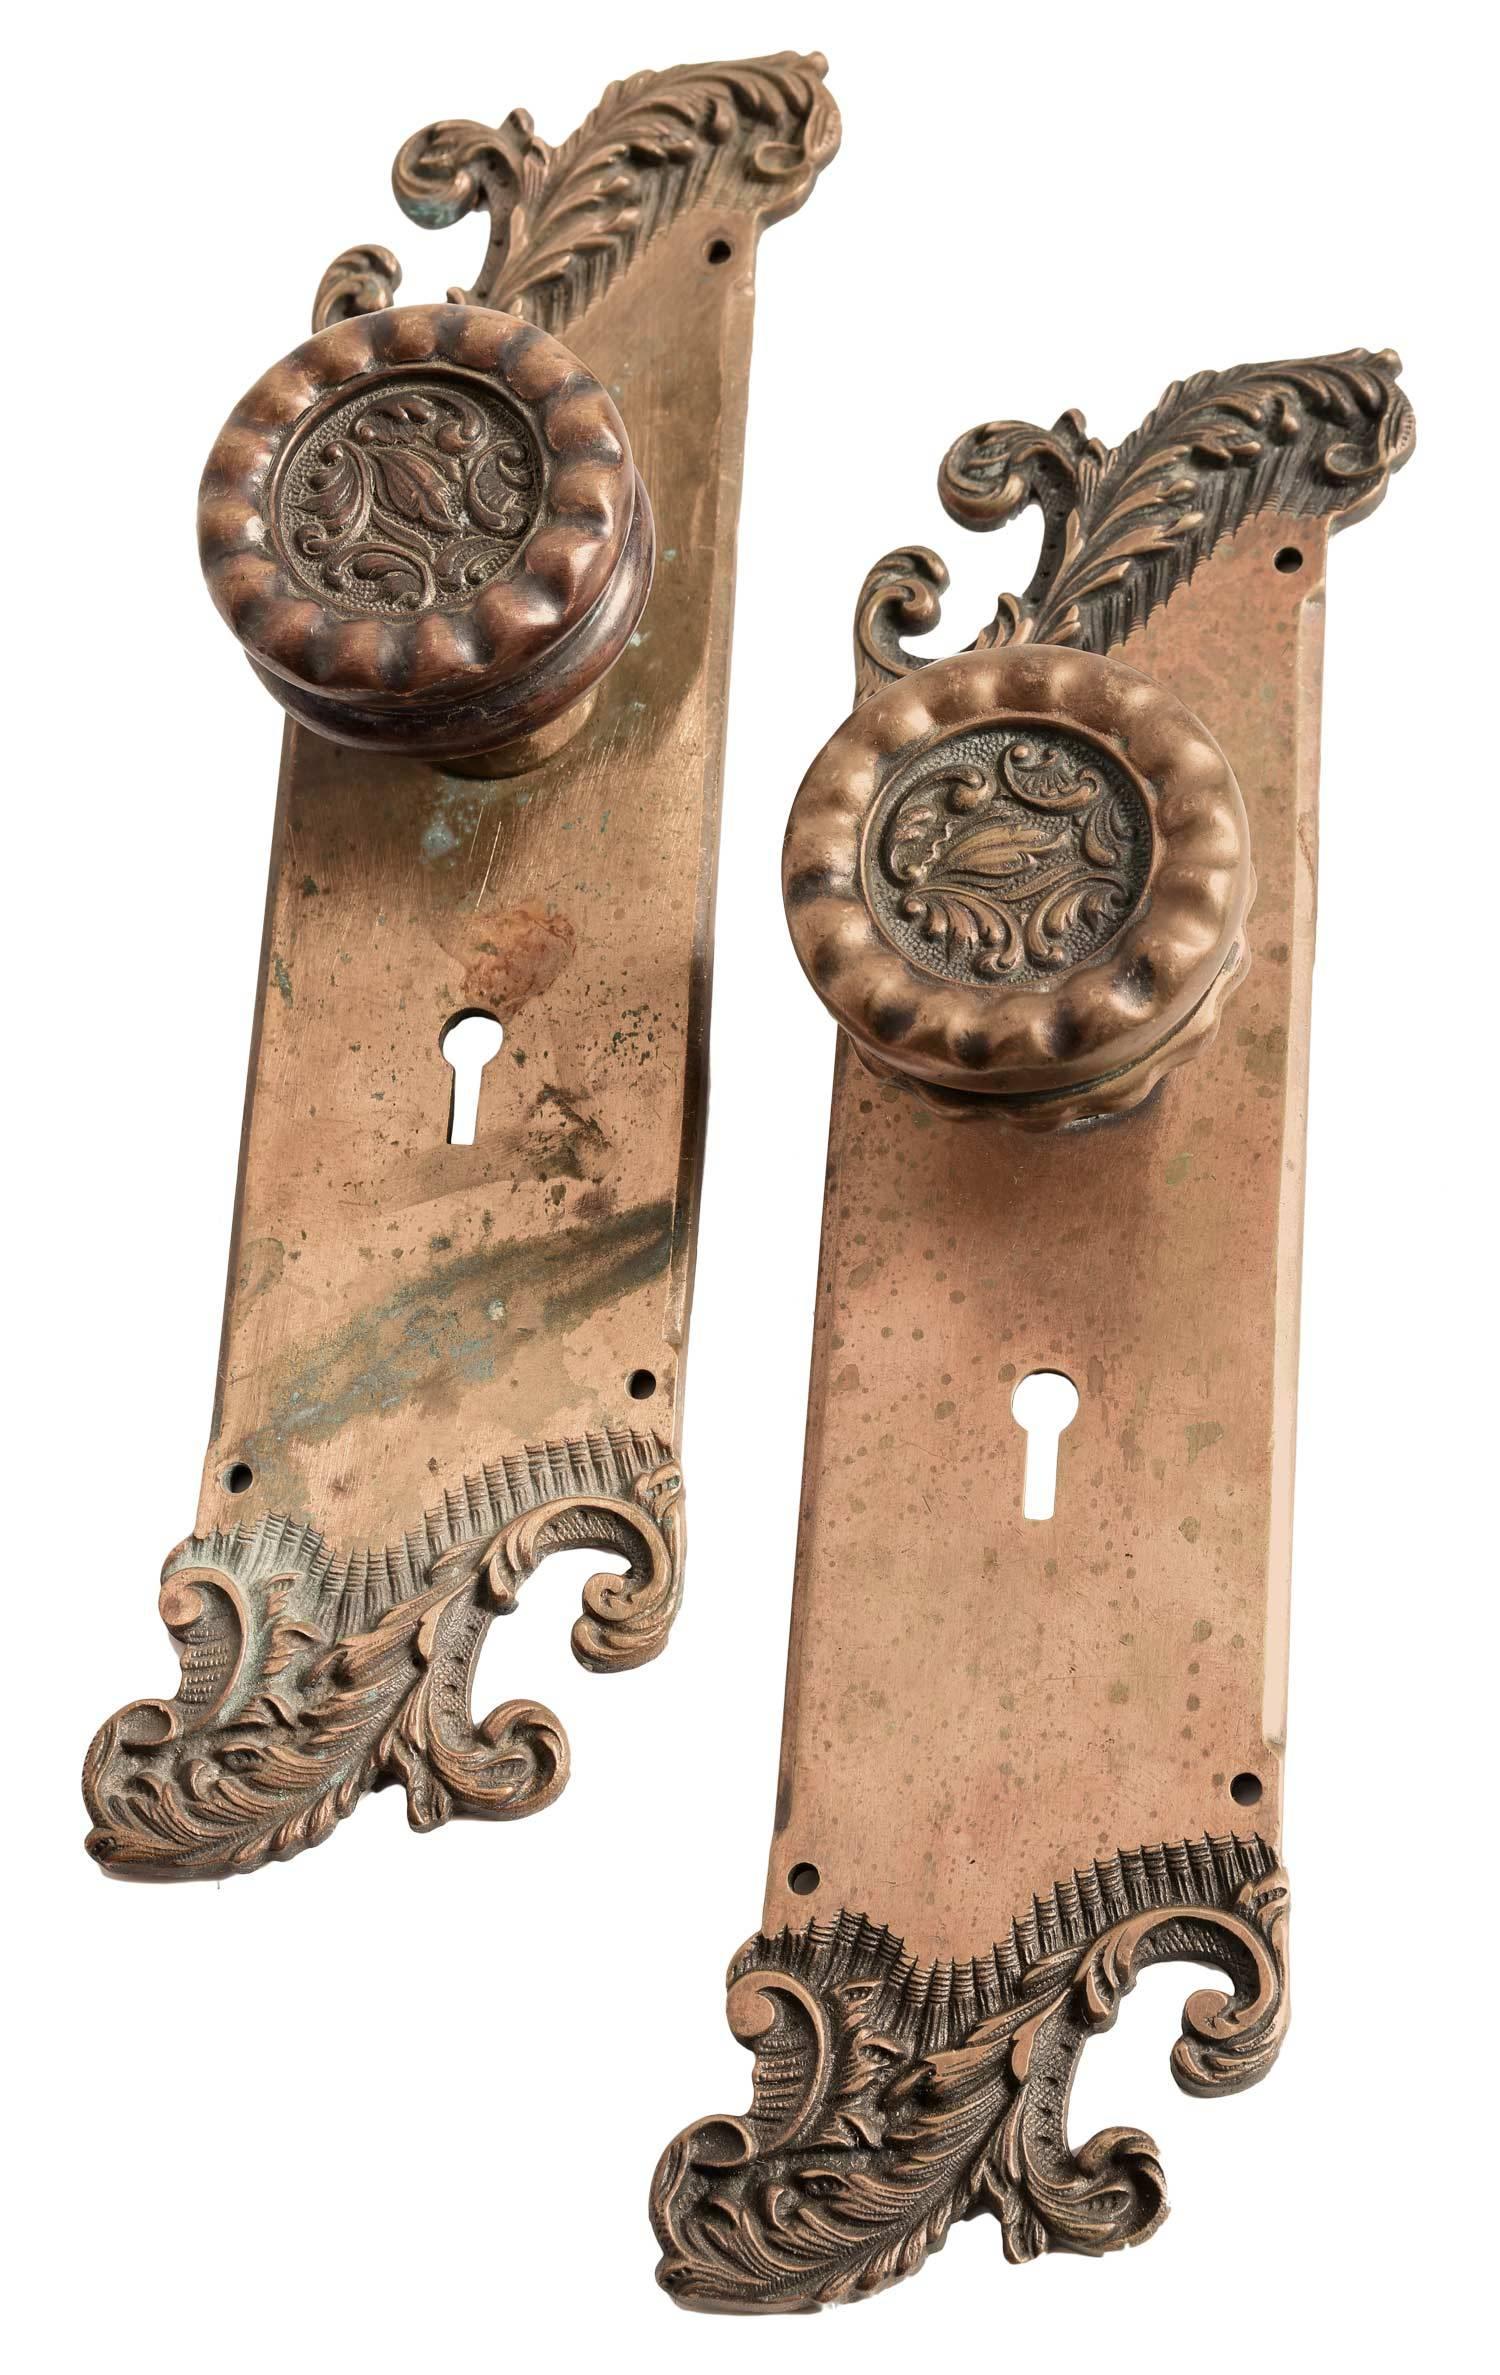 Americus bronze door hardware set by Reading Hardware Company, made of cast brass with amazing castings. This set consists of four backplates, two with a hammered finish and two with a smooth finish, and four matching knobs featuring acanthus leaf